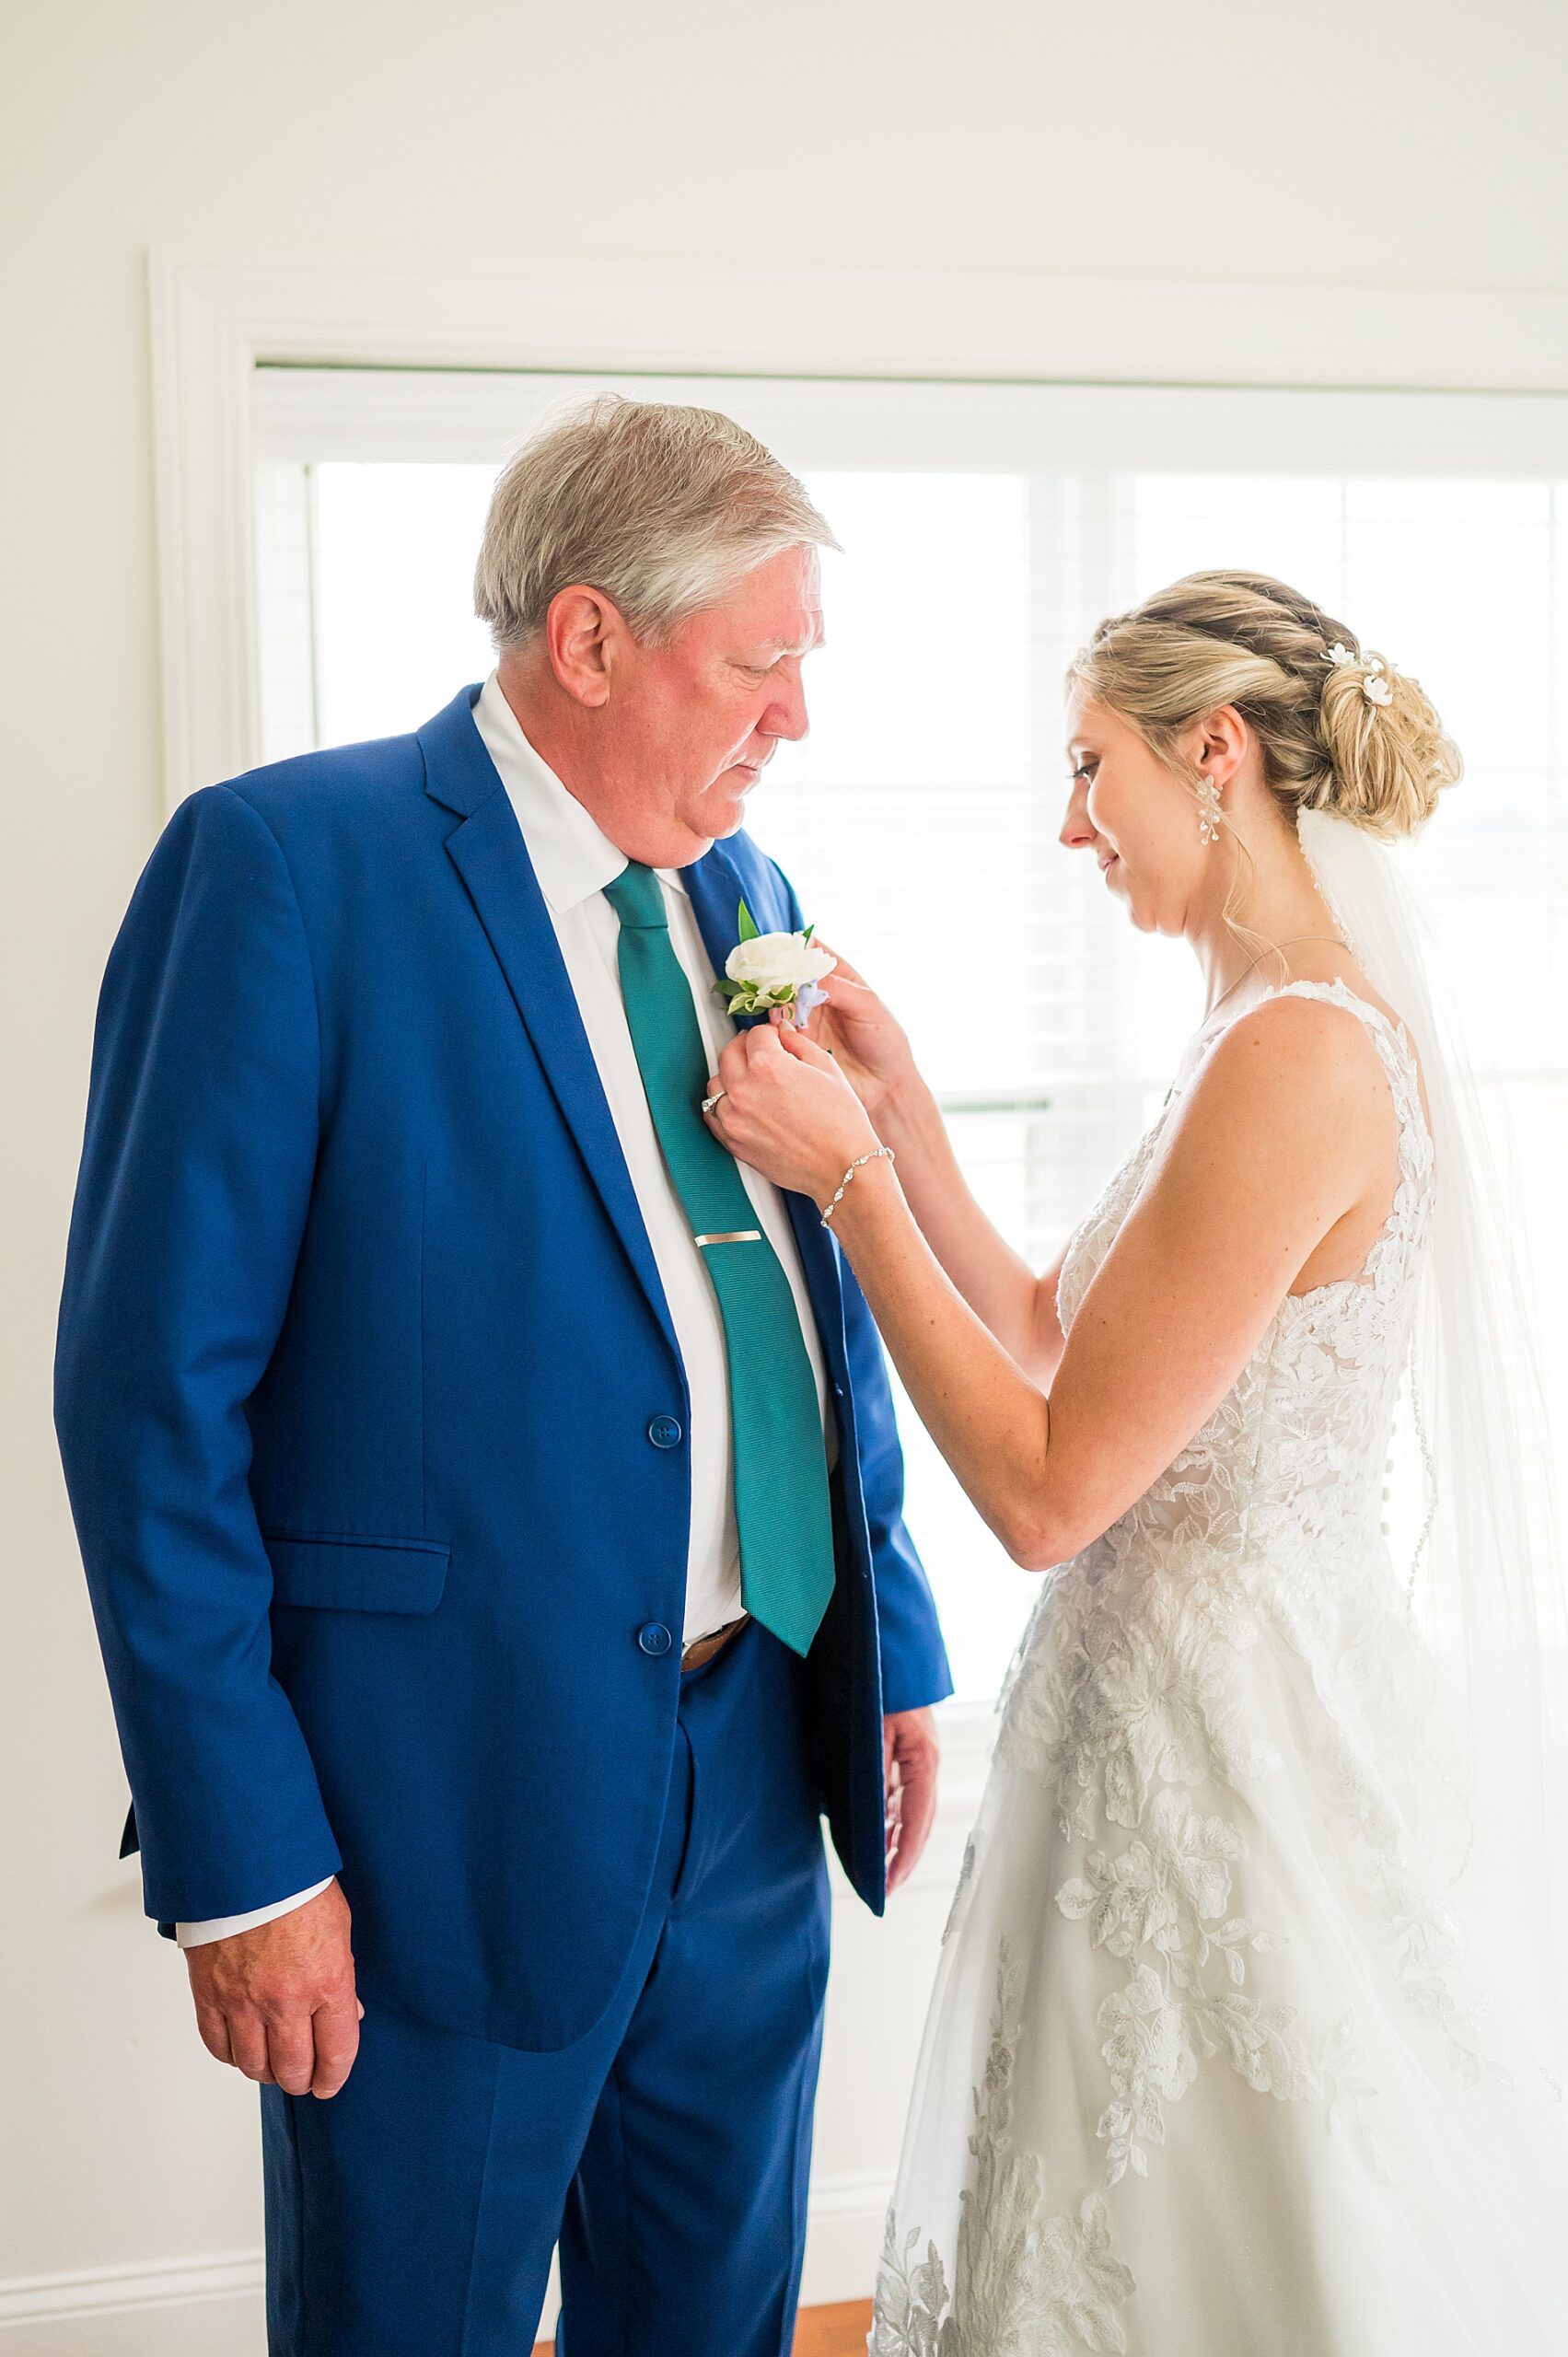 bride pins boutonniere on her dad's suit